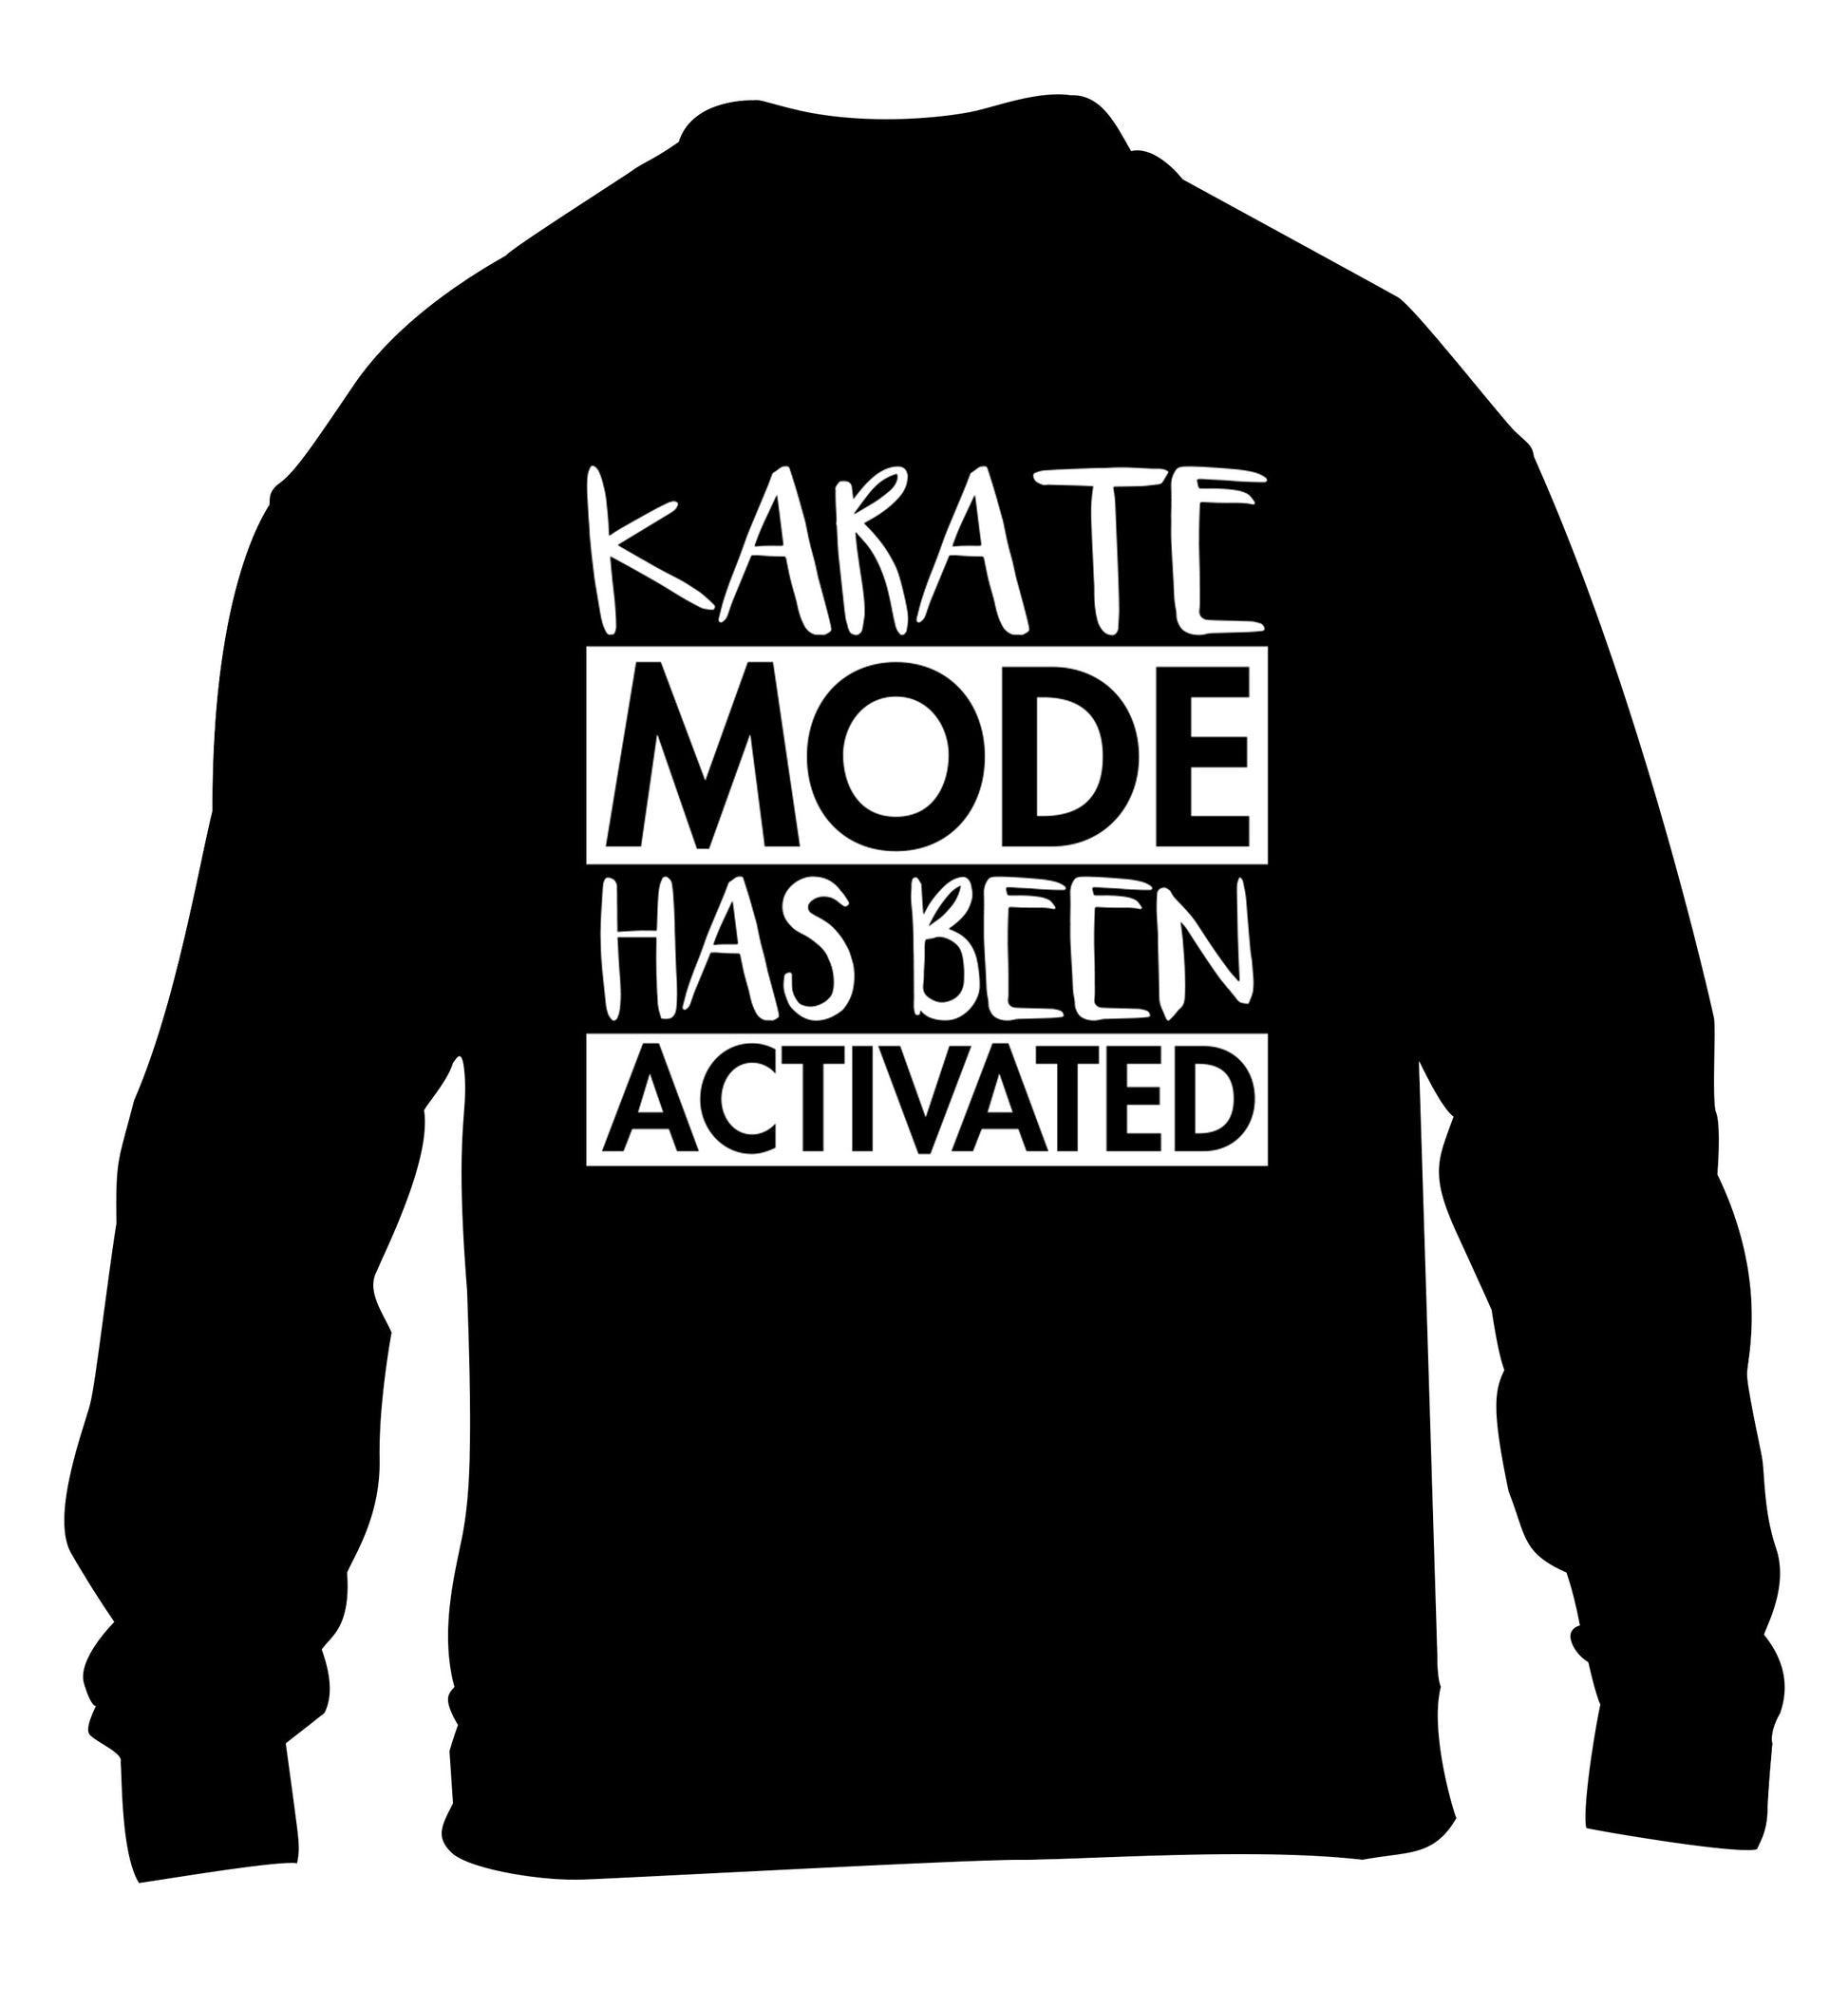 Karate mode activated children's black sweater 12-14 Years